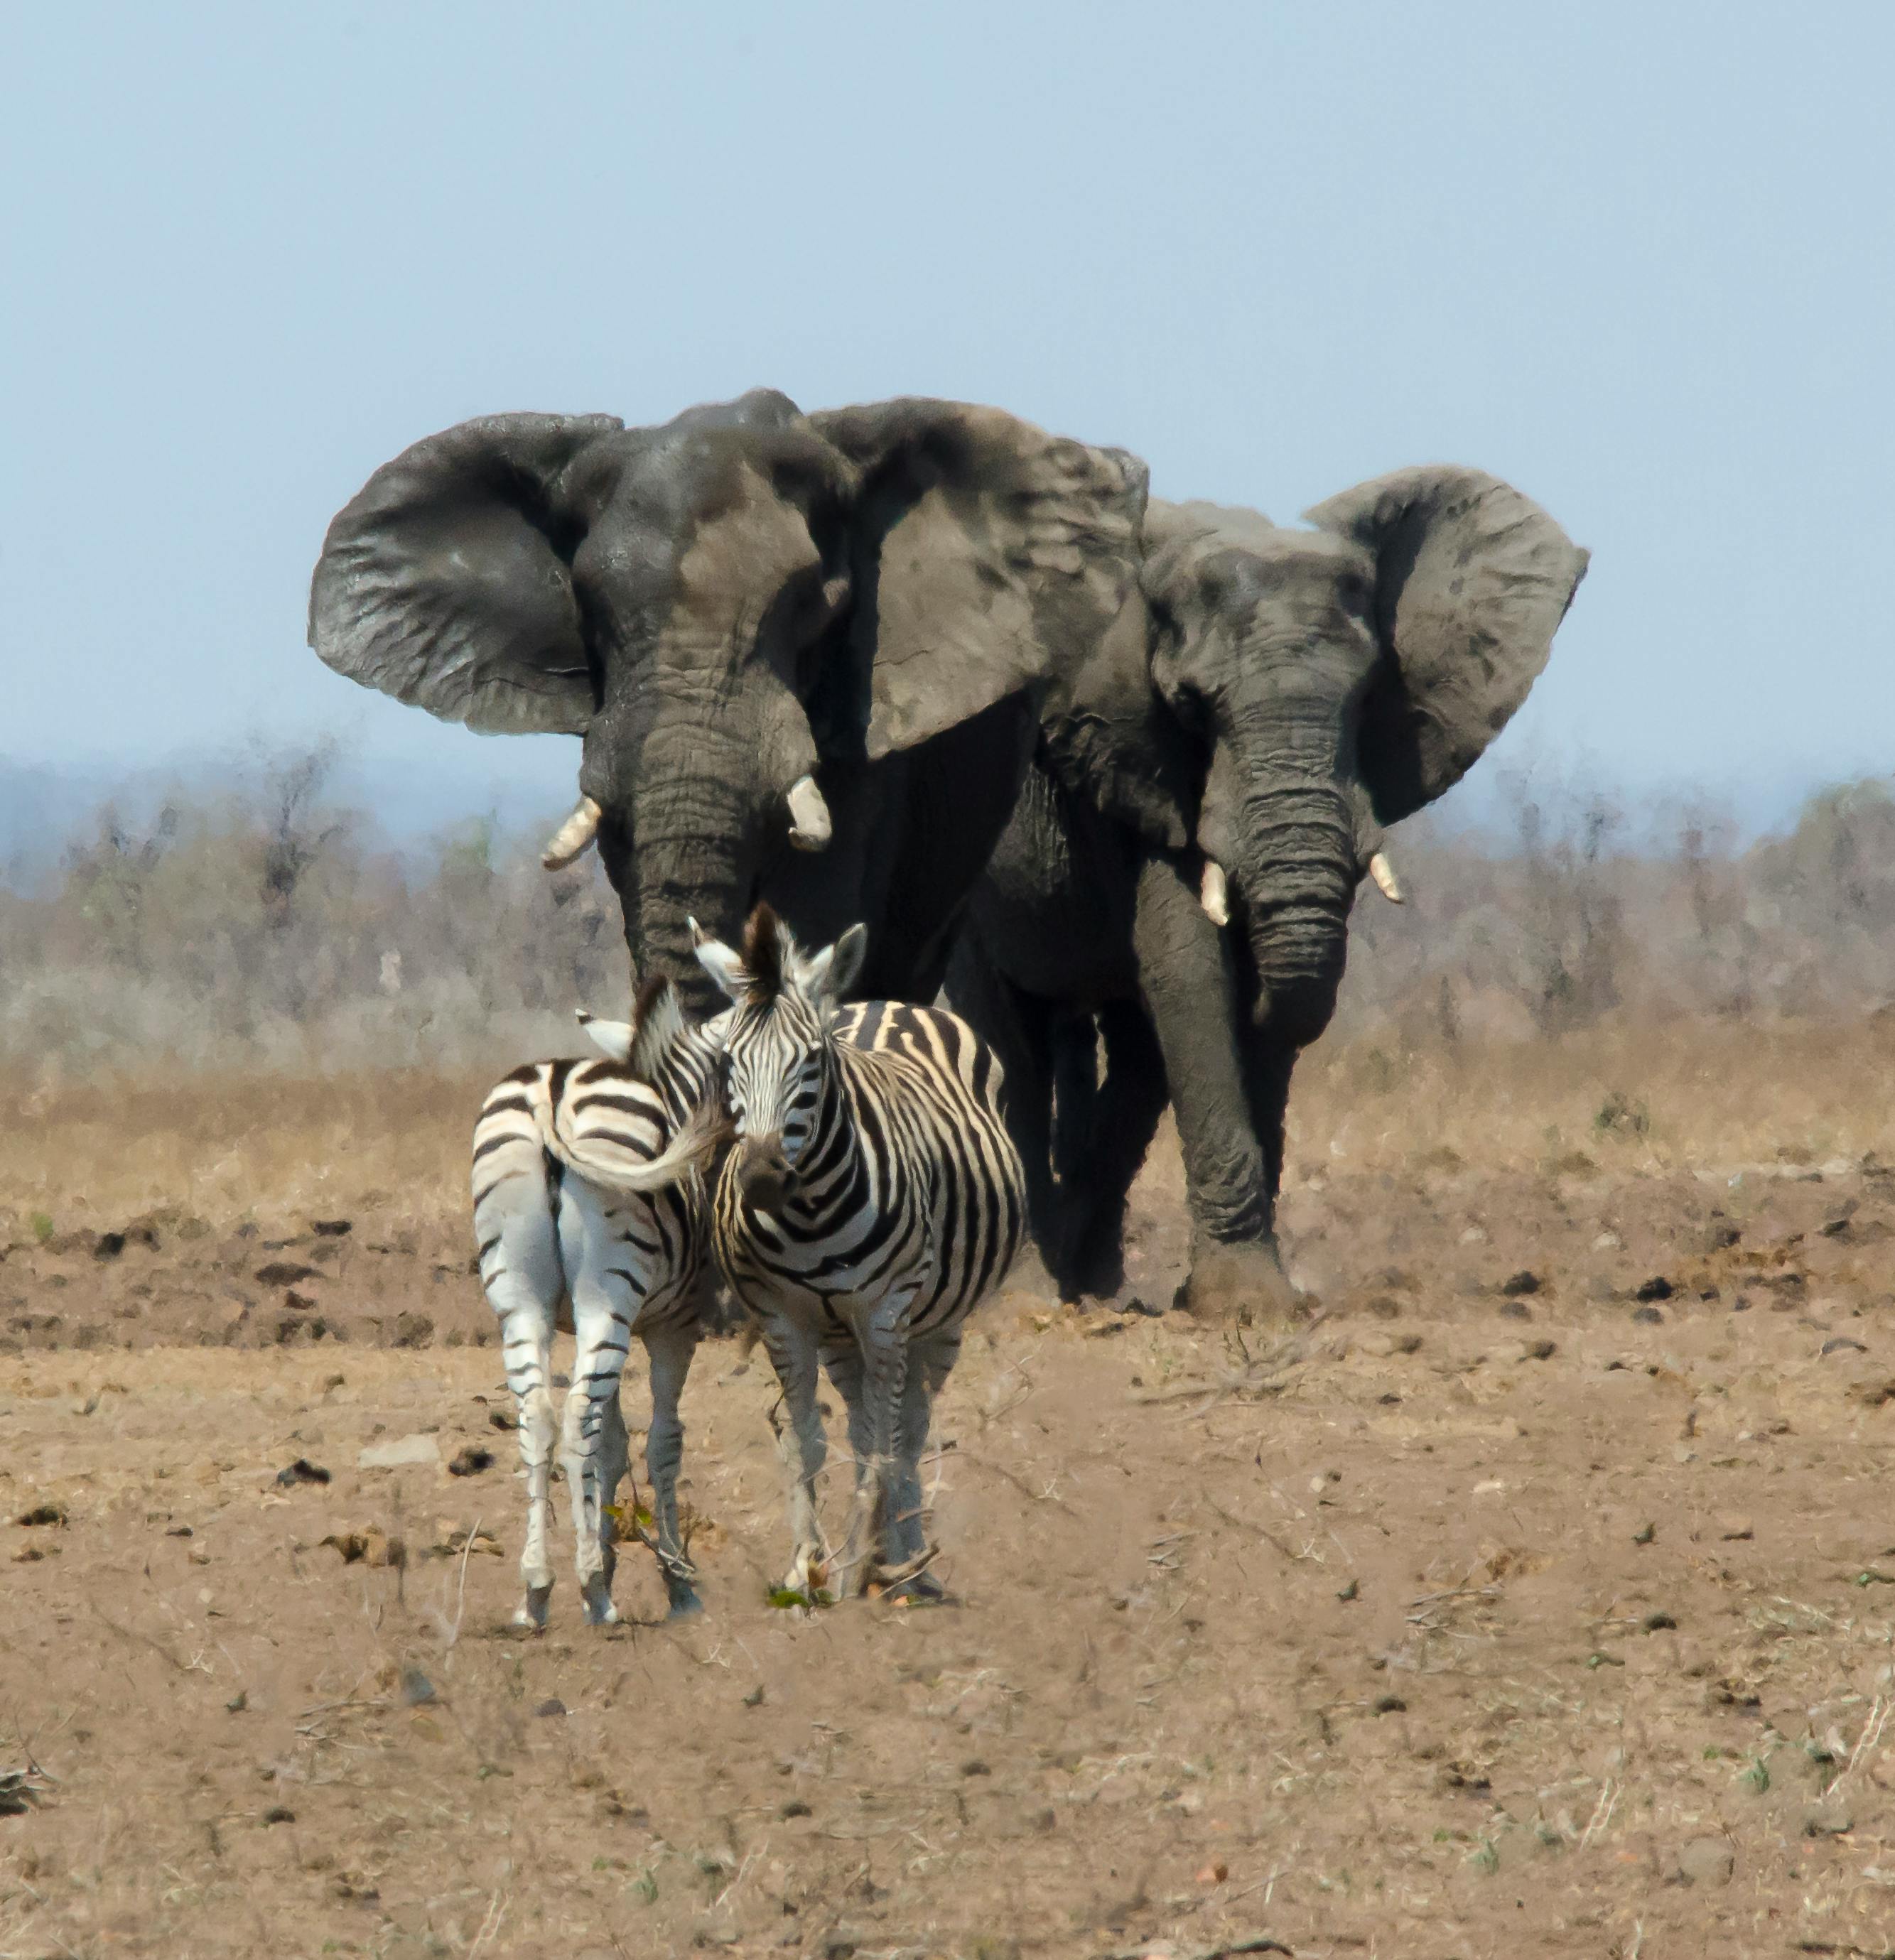 Free stock photo of Elephant and zebra standing together in a drought